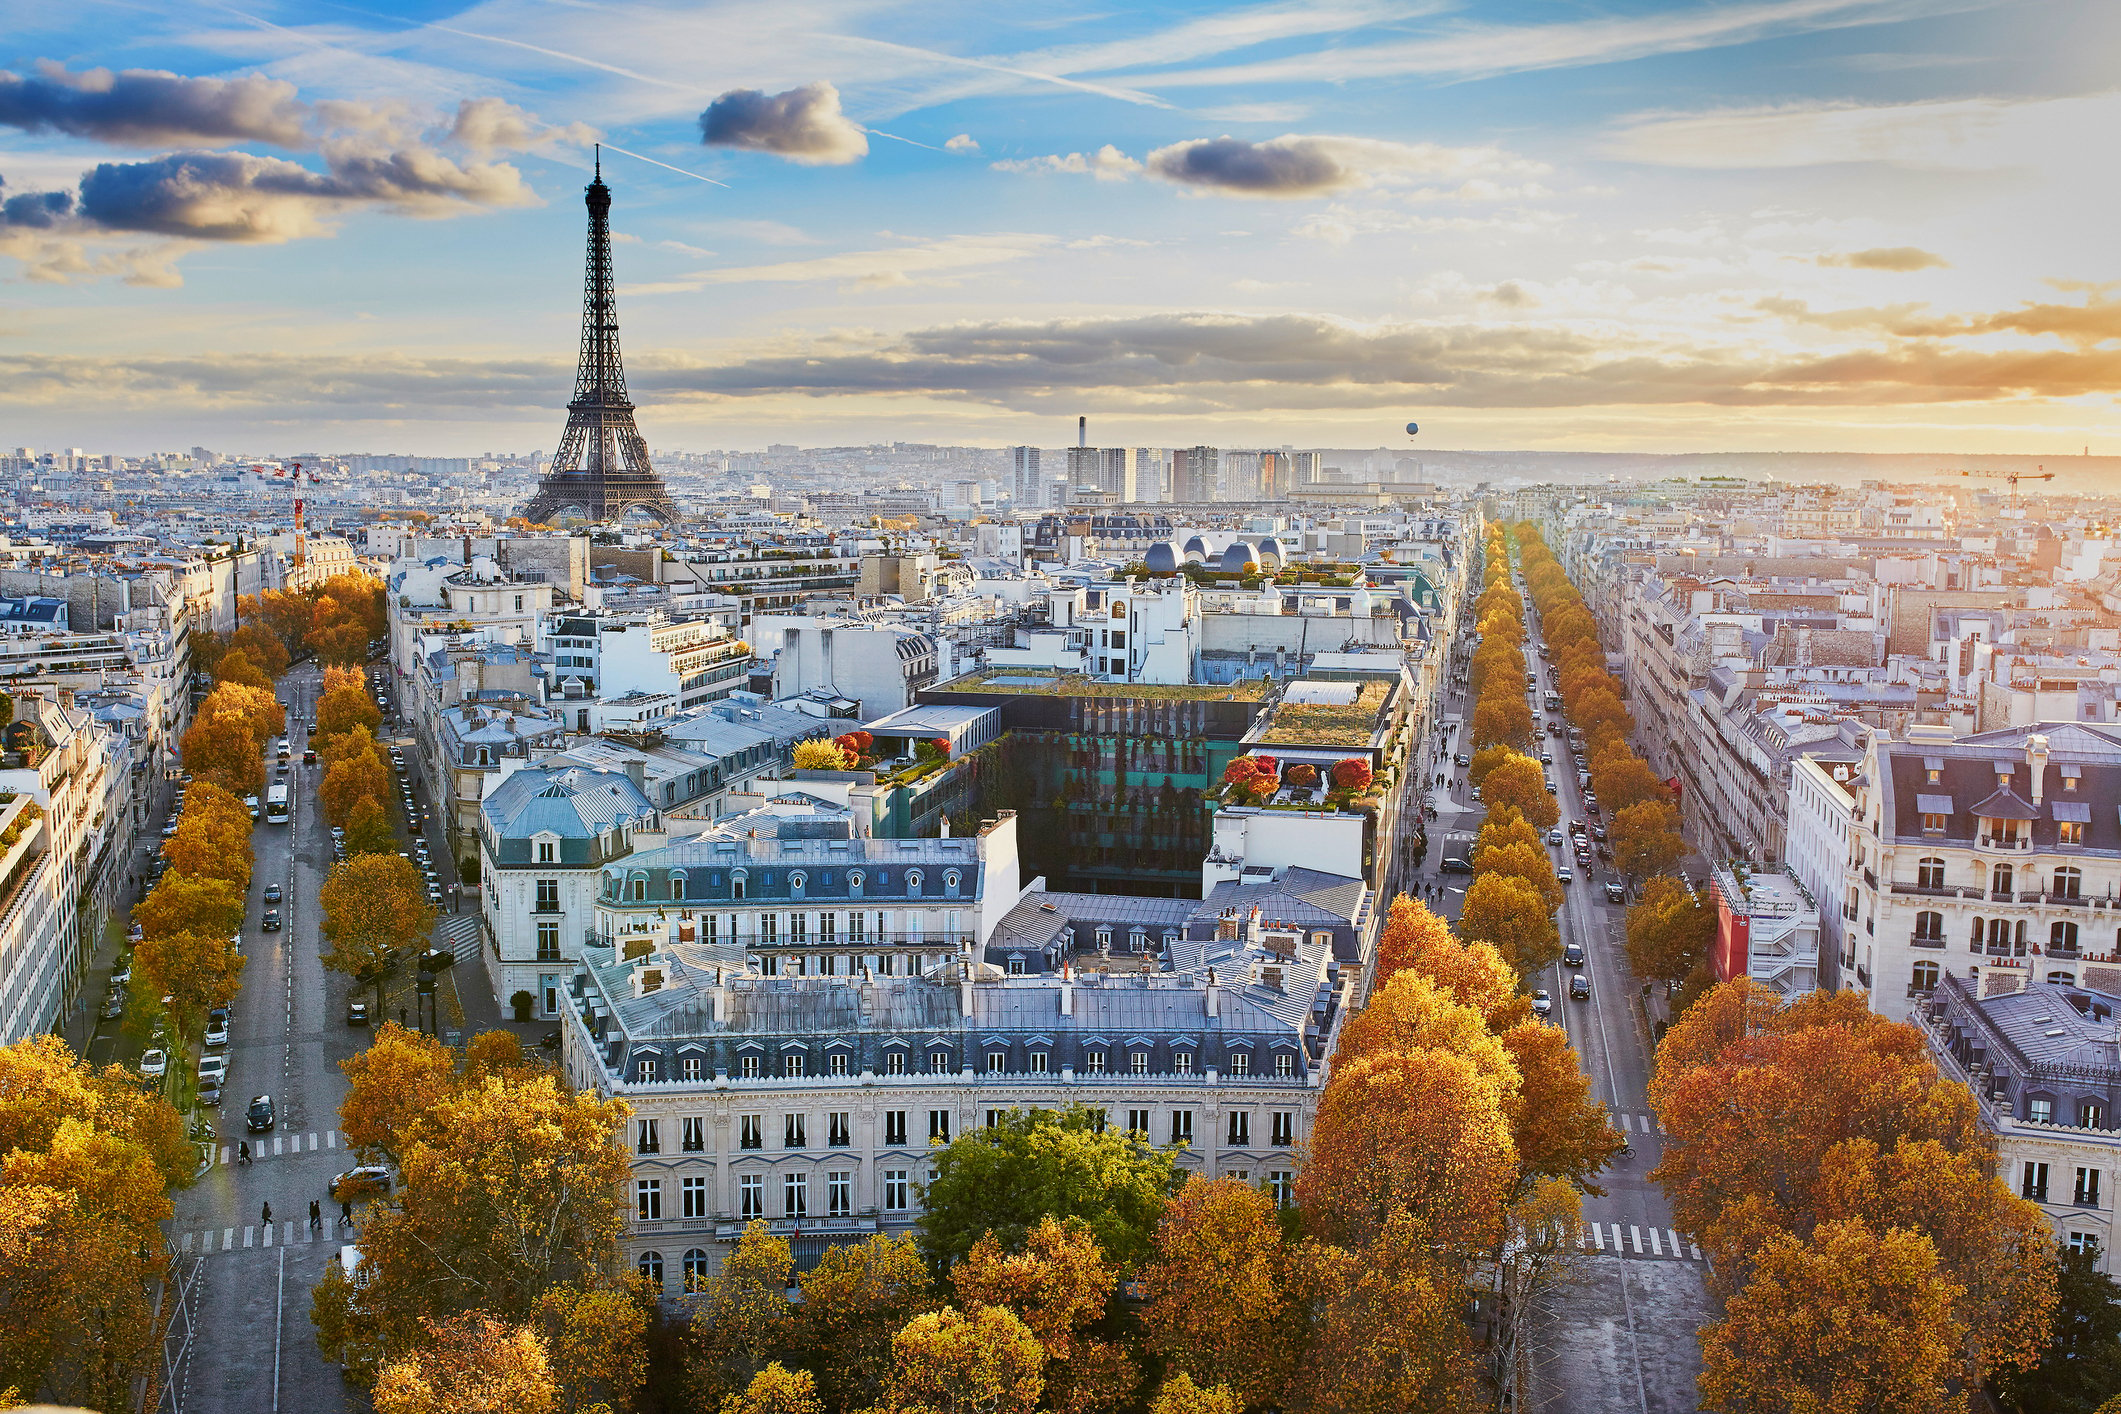 Paris and France are seeing a return to normality in the hotel industry